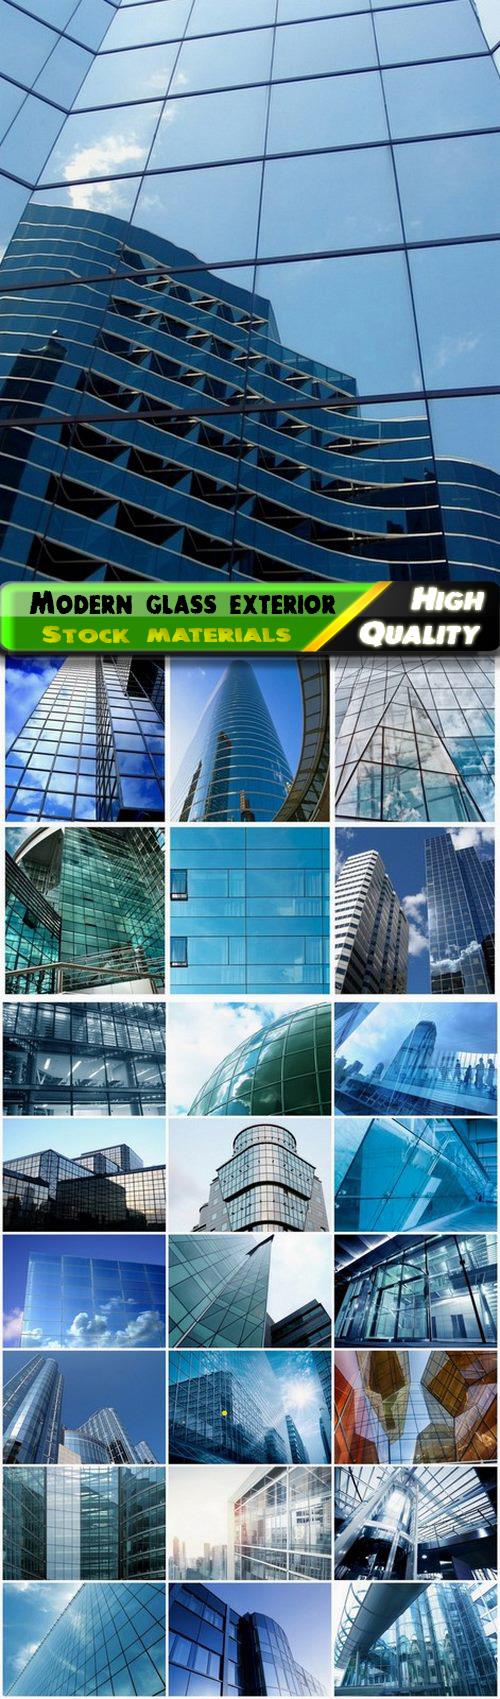 Modern exterior of glass building and office skyscraper - 25 HQ Jpg